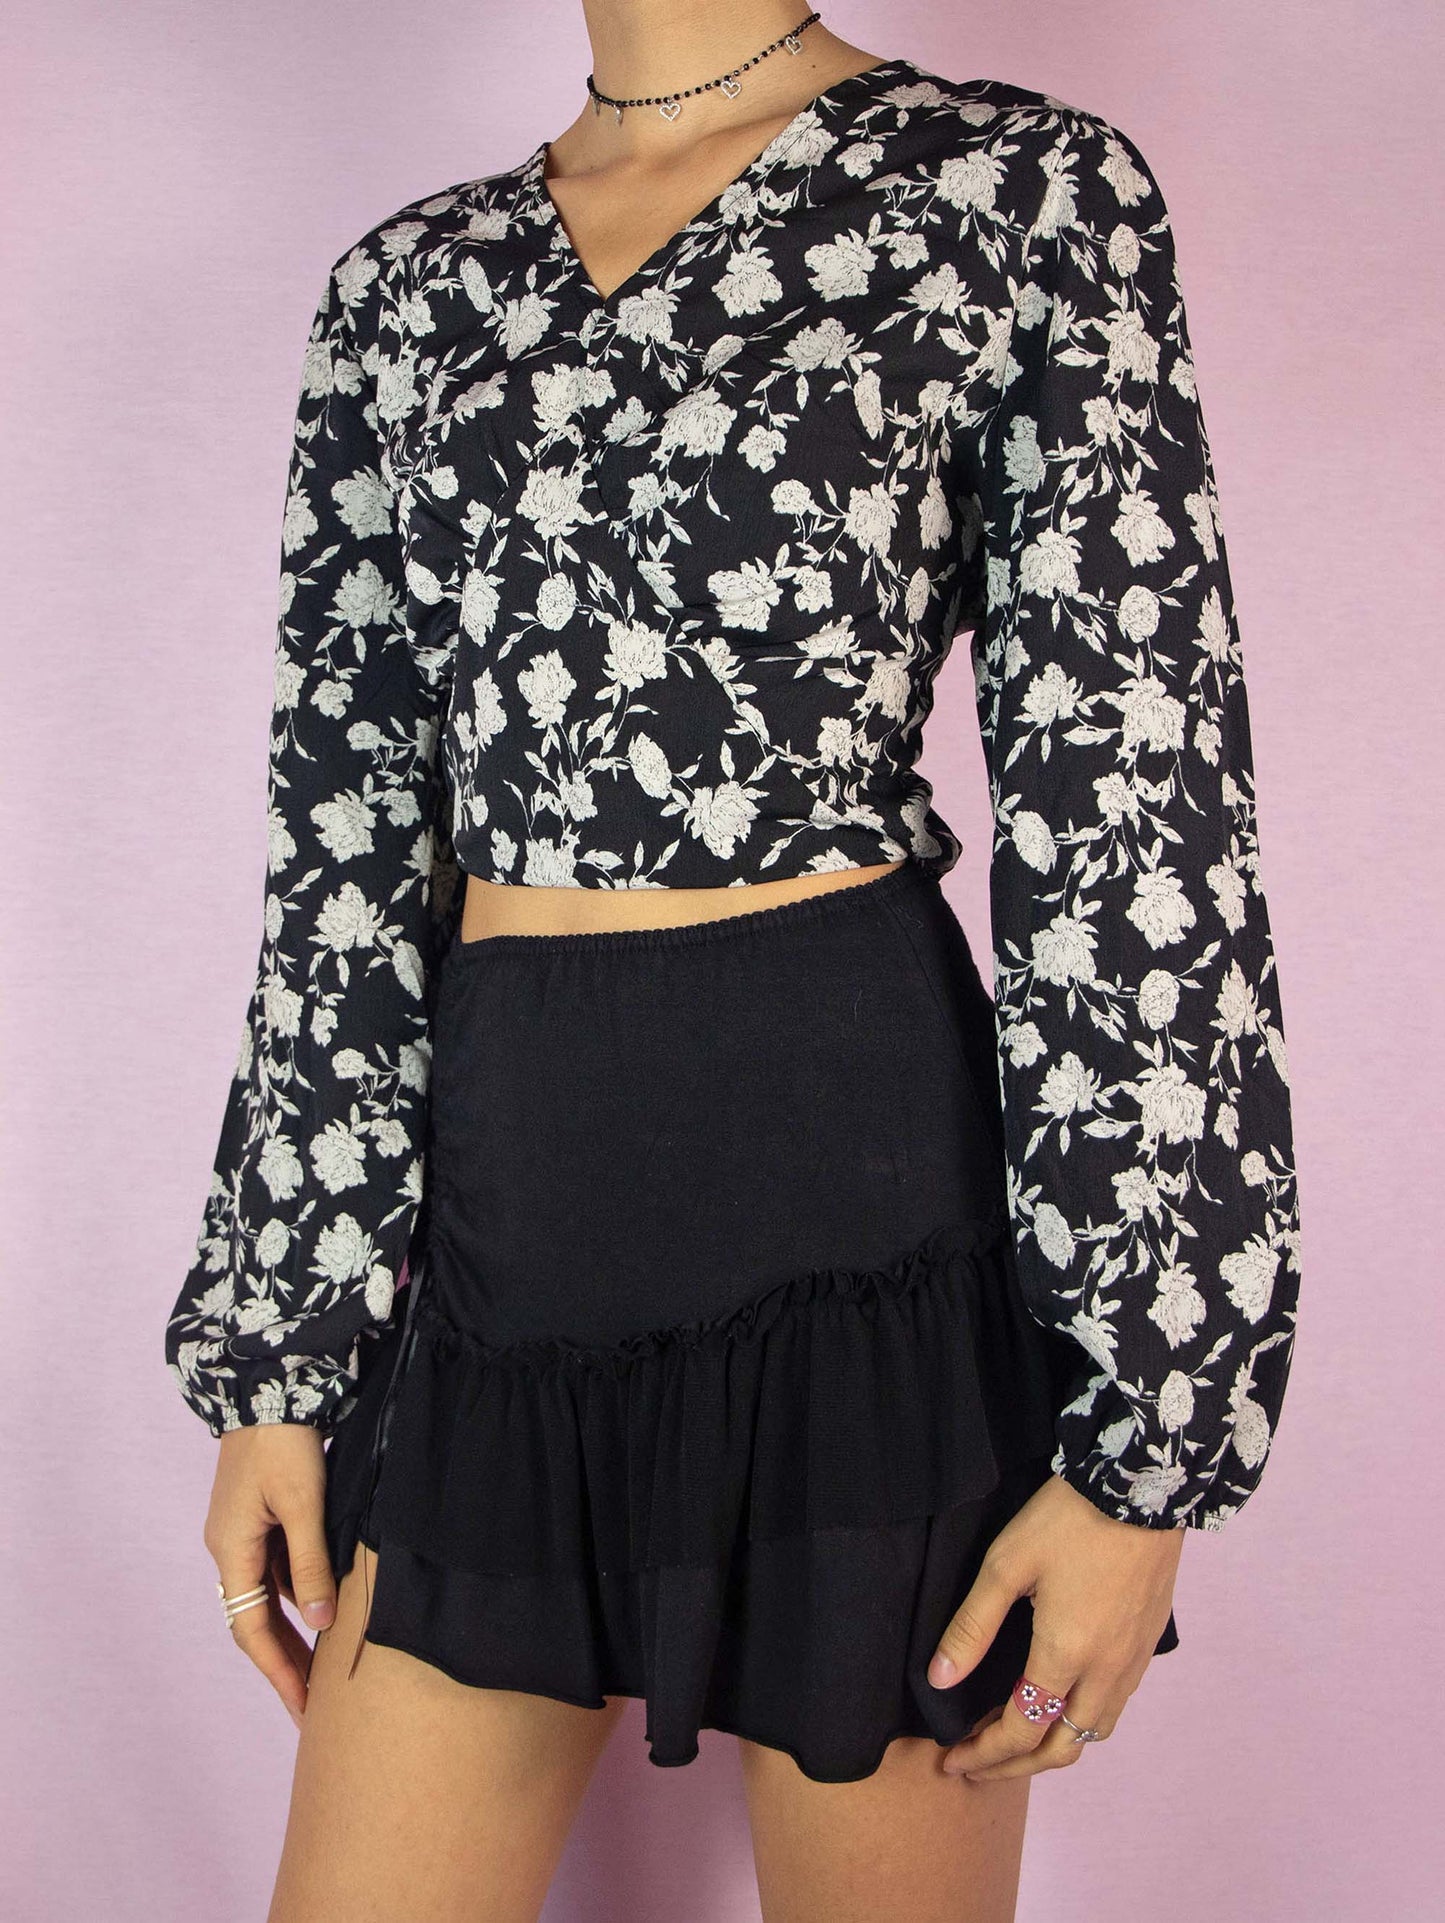 The Y2K Black Floral Tie Back Top is a vintage 2000s boho blouse with a floral graphic print, balloon sleeves, V-neckline, and elastic at the waist.